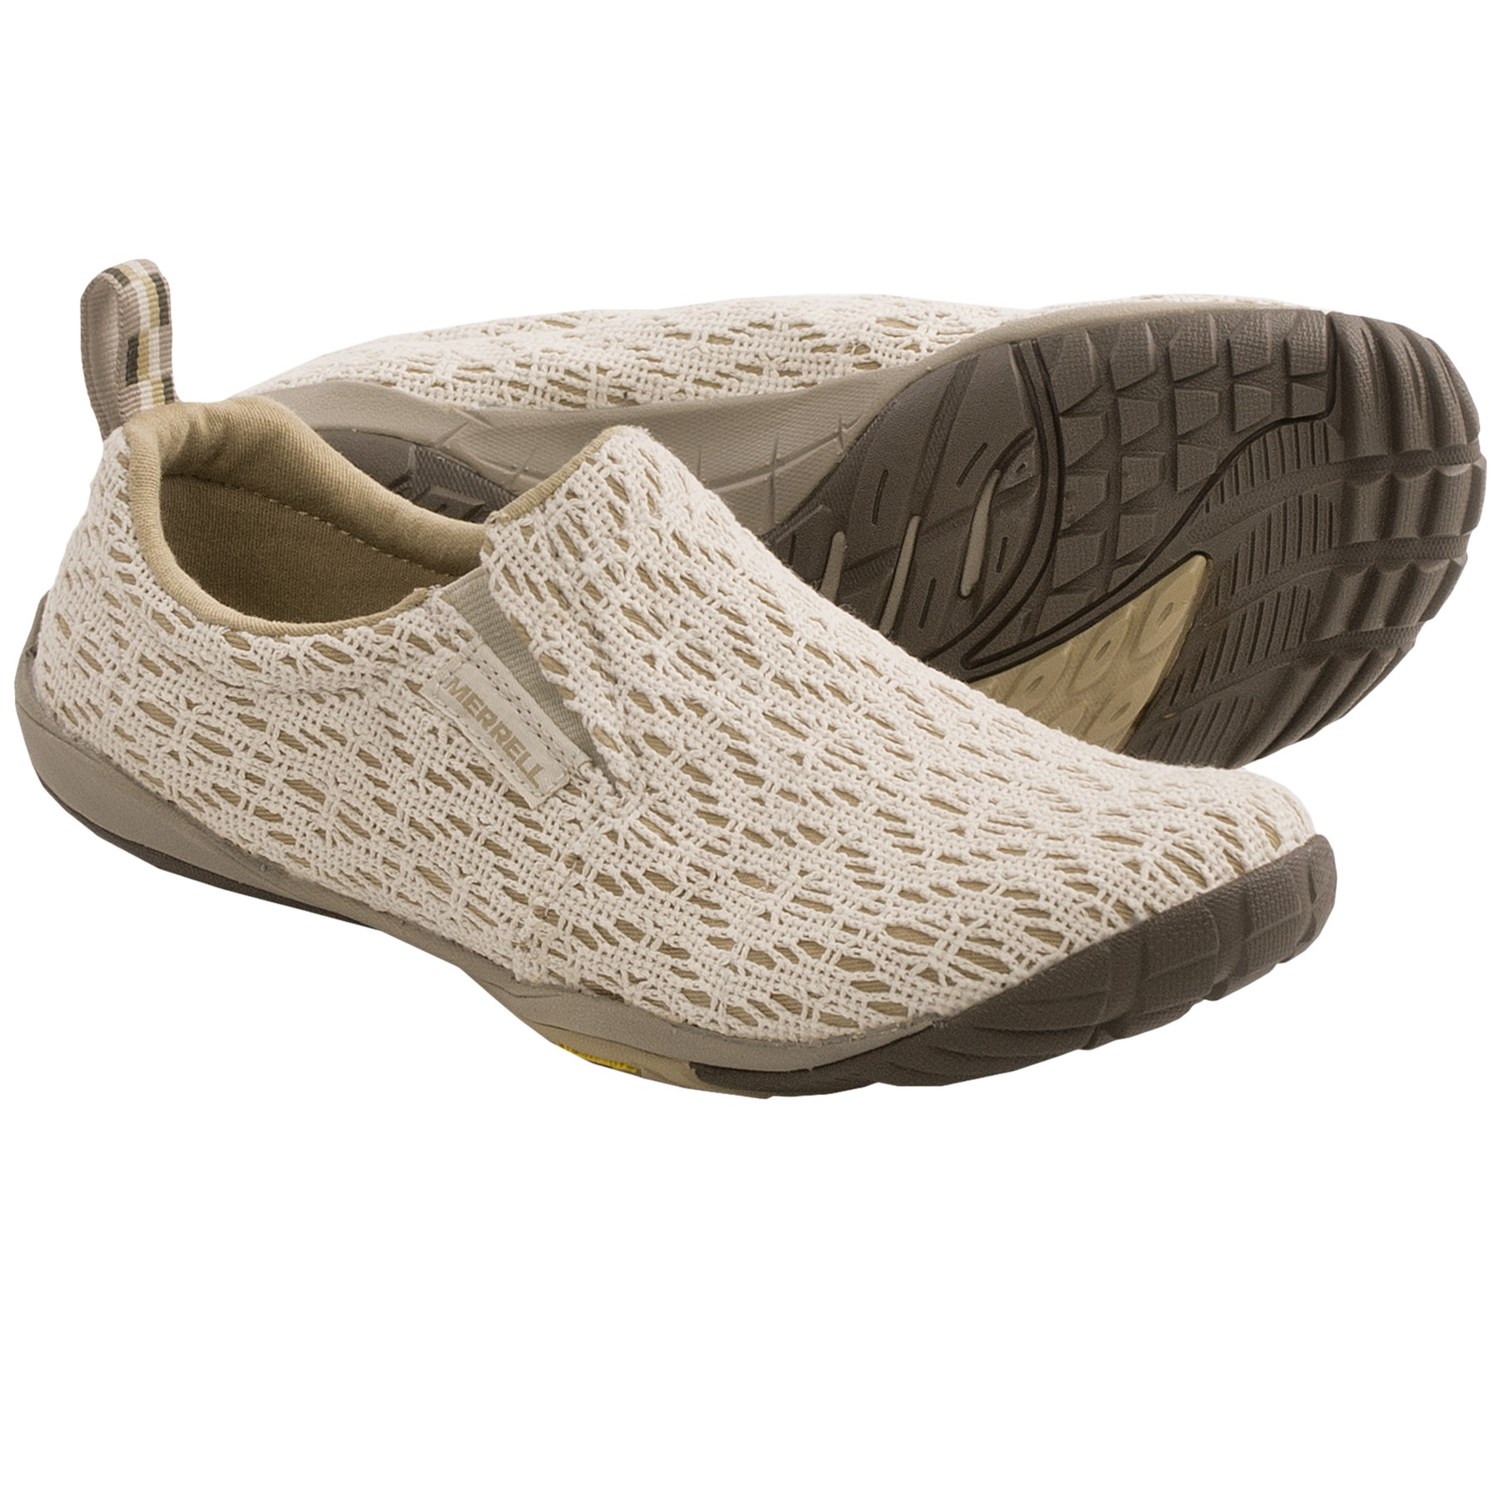 Merrell Barefoot Life Jungle Glove Lace Shoes (For Women) 7629V - Save 73%